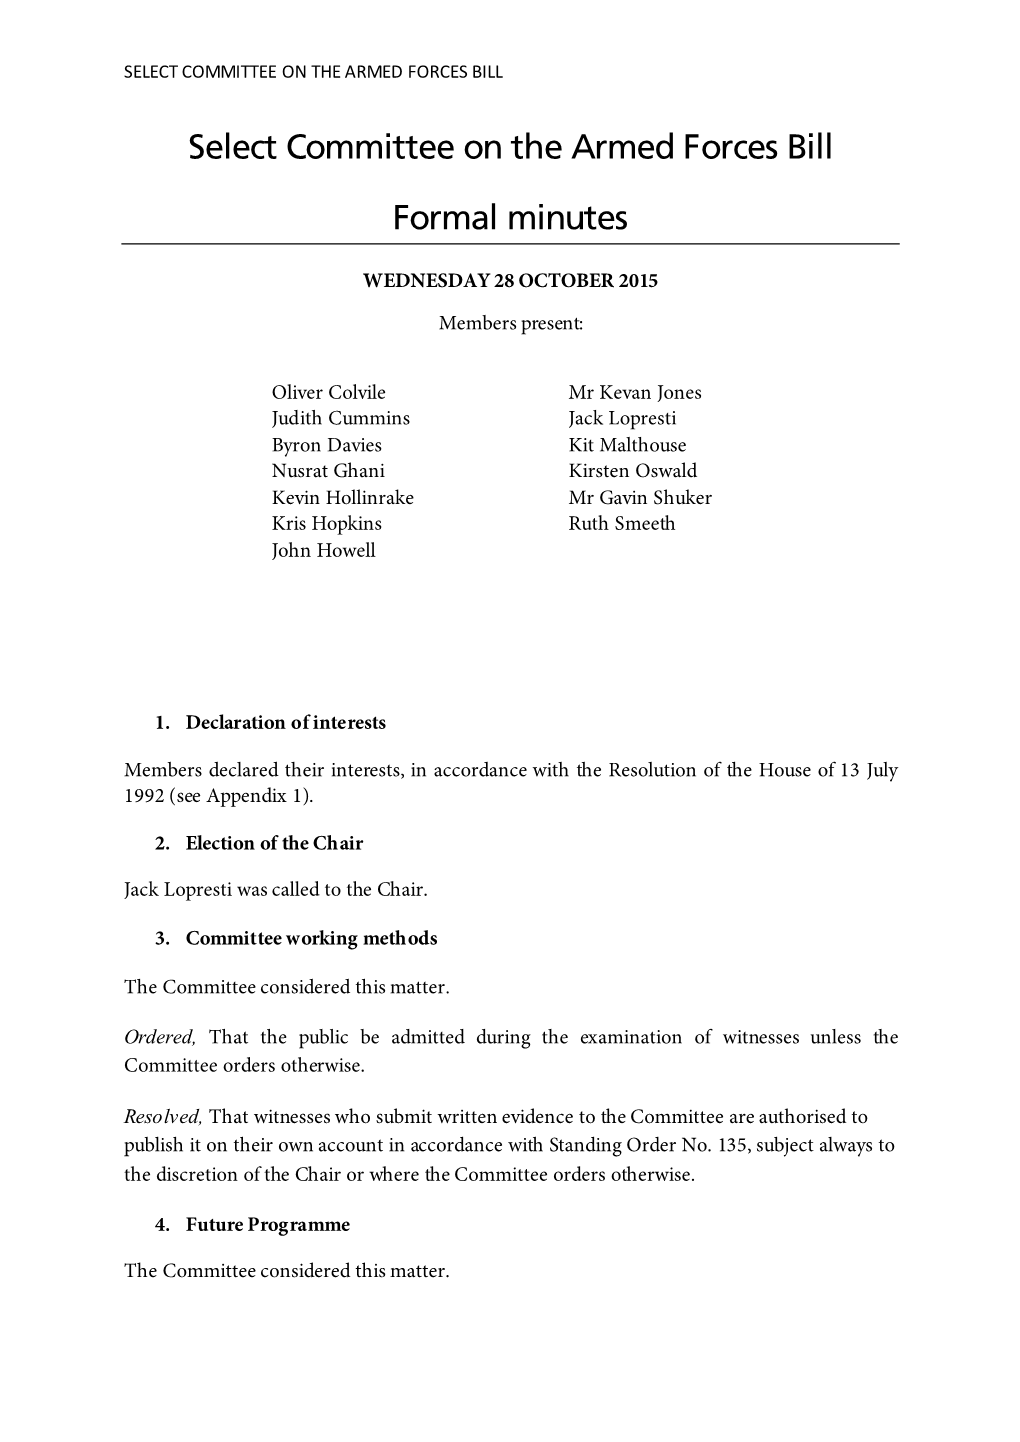 Select Committee on the Armed Forces Bill Formal Minutes